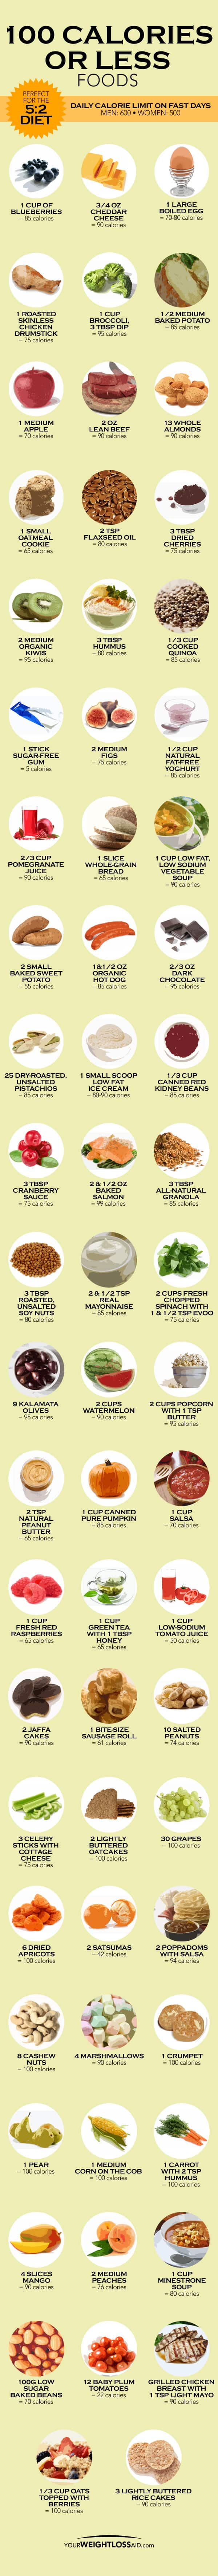 A list of foods with 100 calories or less - a great reference for the 5:2 fasting diet plan